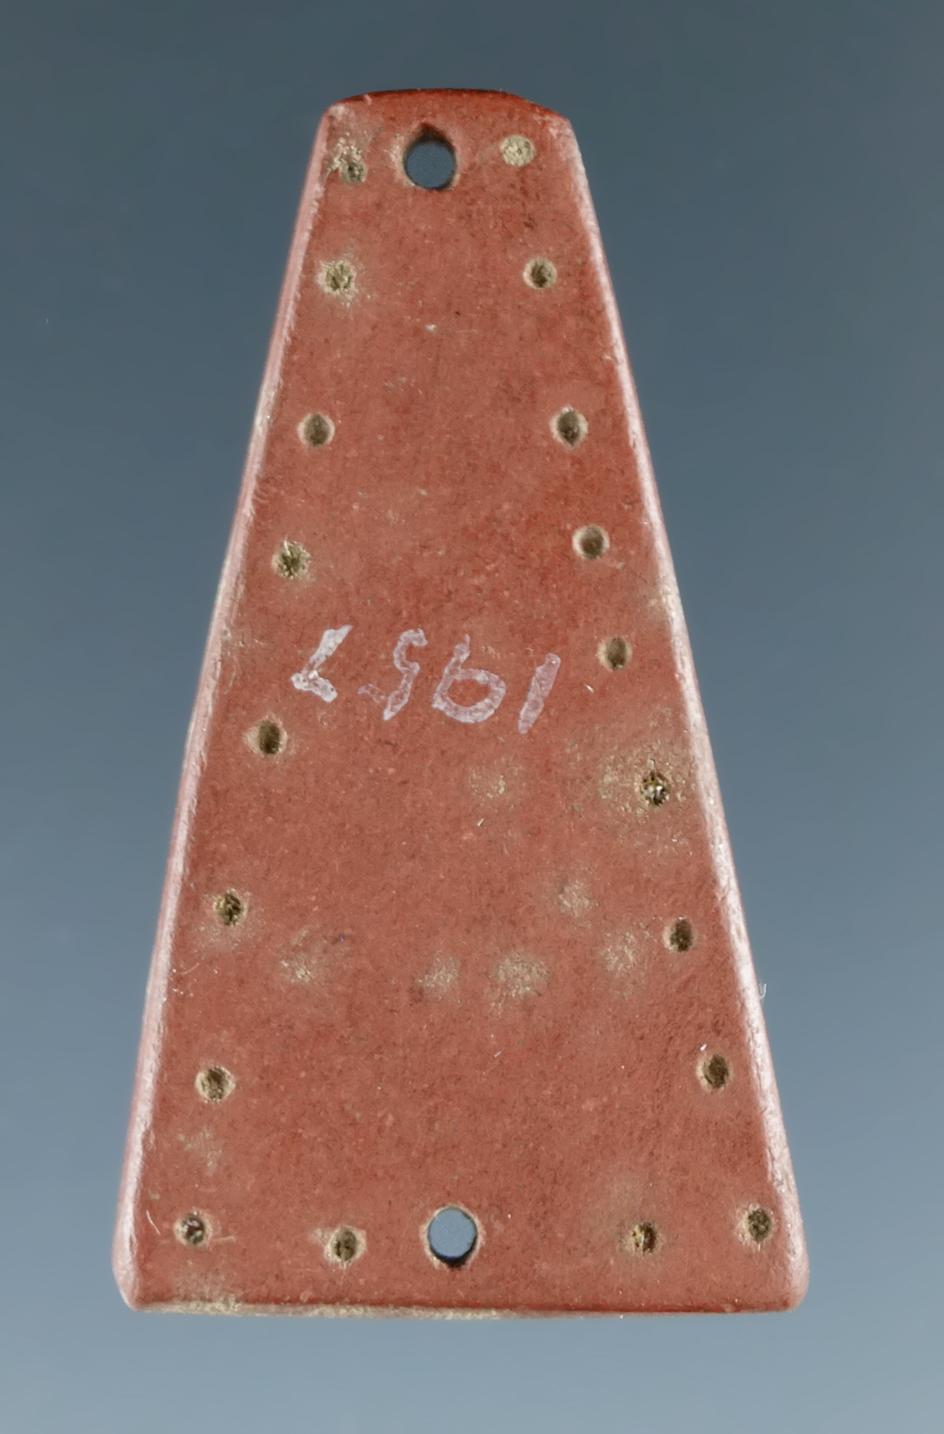 Nicely decorated 1 5/16" Trapezoidal Ornament with punctate and incised line design - New York.